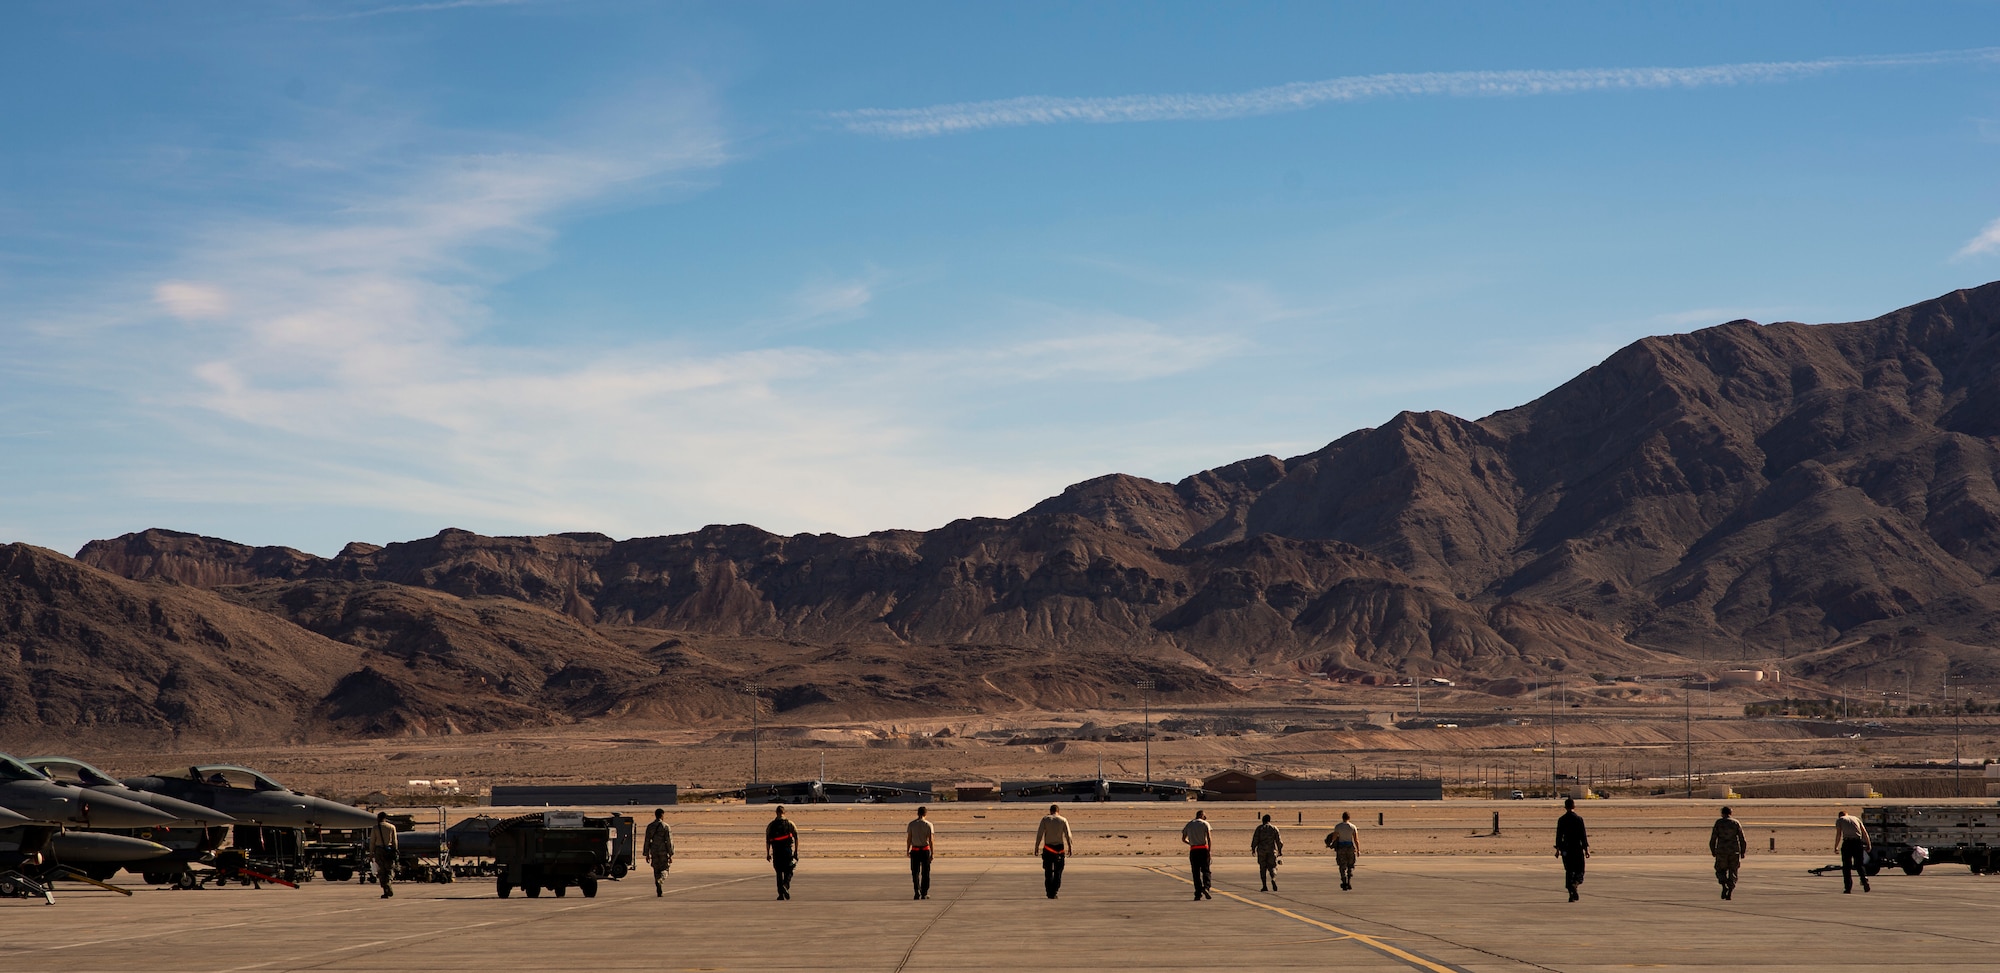 U.S. Airmen assigned to the 20th Aircraft Maintenance Squadron, 79th Aircraft Maintenance Unit, perform a foreign object and debris (FOD) walk during Exercise Red Flag 19-1 at Nellis Air Force Base, Nev., Jan. 28, 2019.